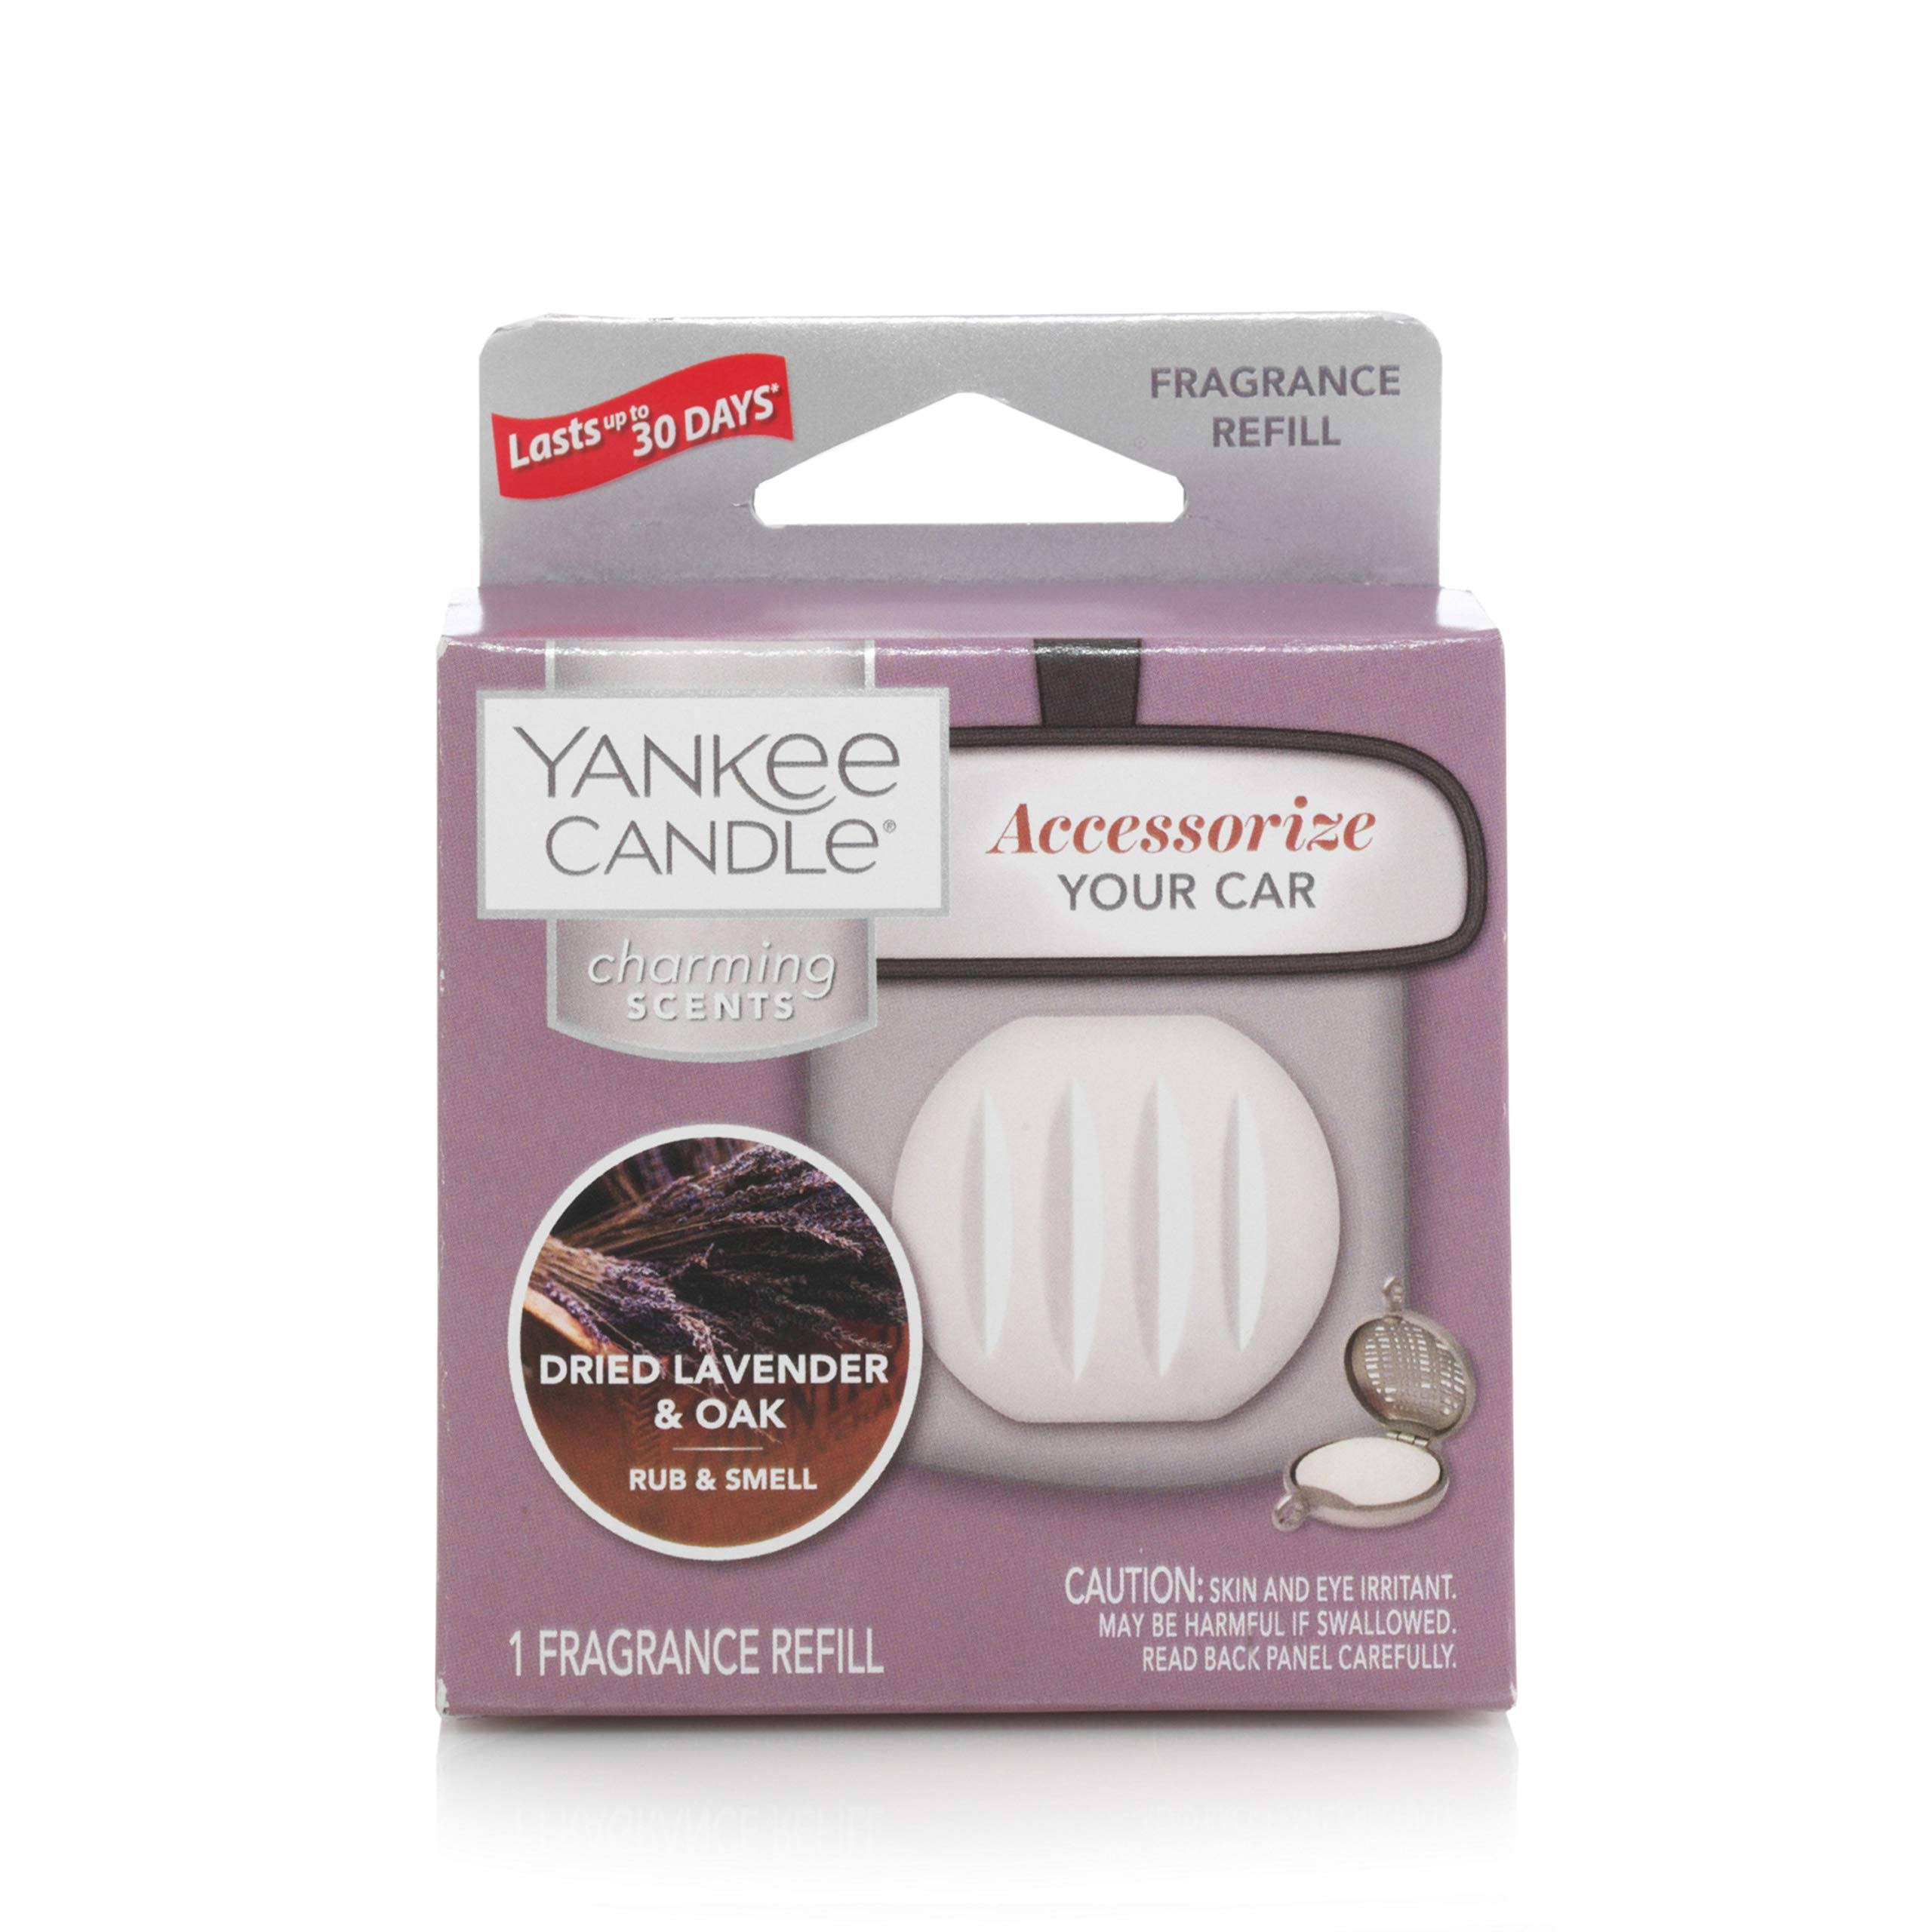 Yankee Candle Company Fragrance Charming Lavendar Scented Air Freshener Refill, Dried Lavender and Oak